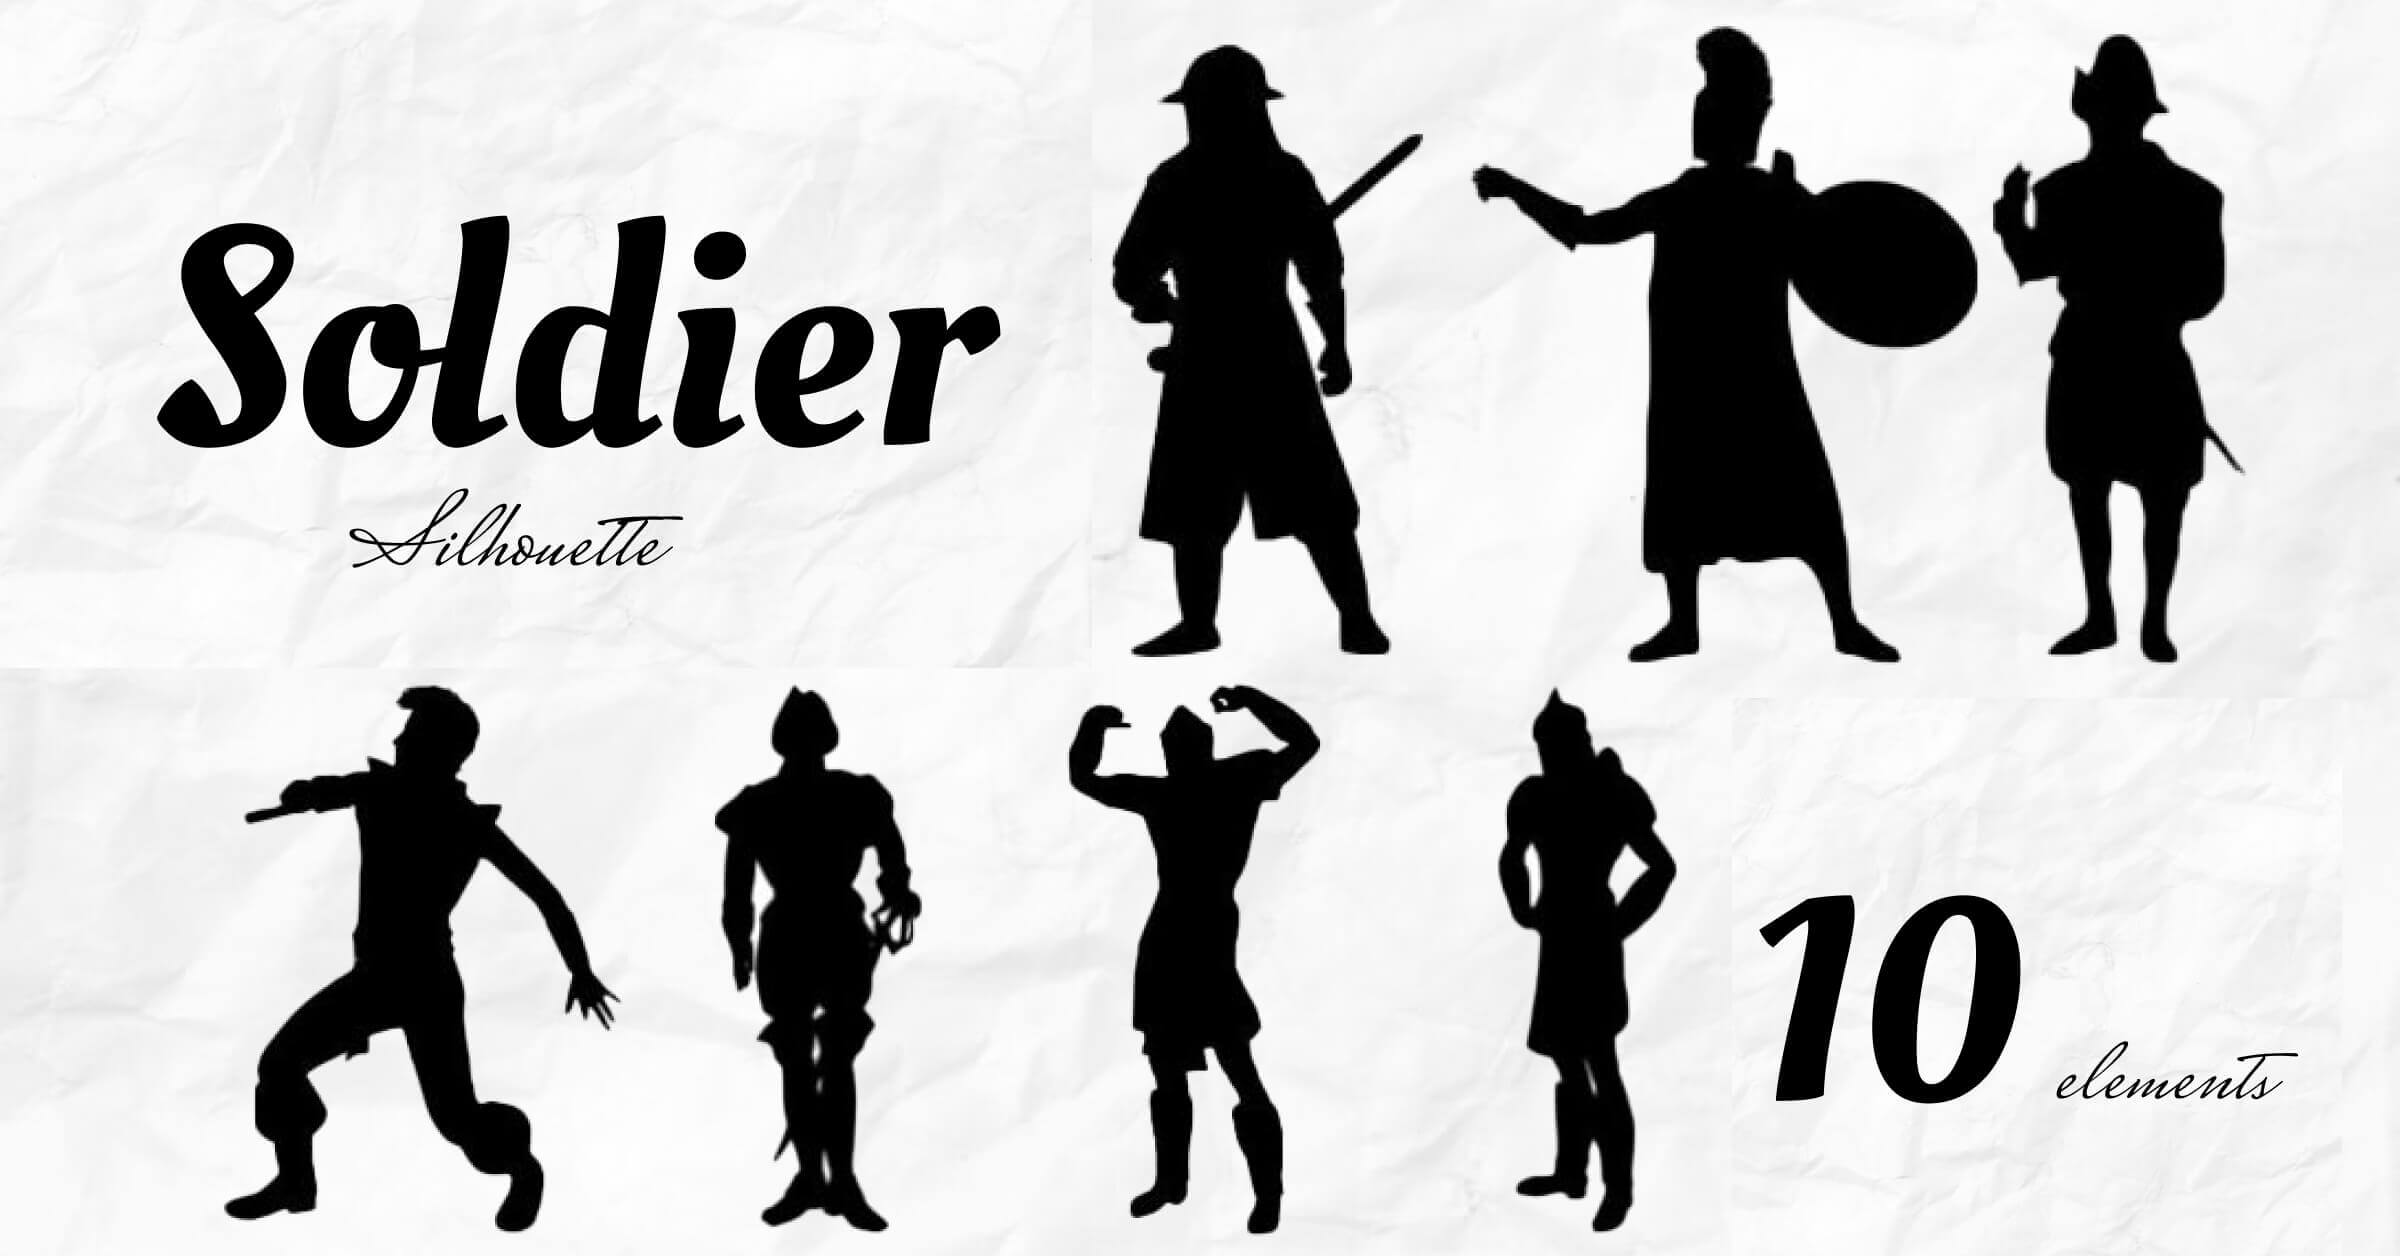 Silhouettes of larger and smaller soldiers.